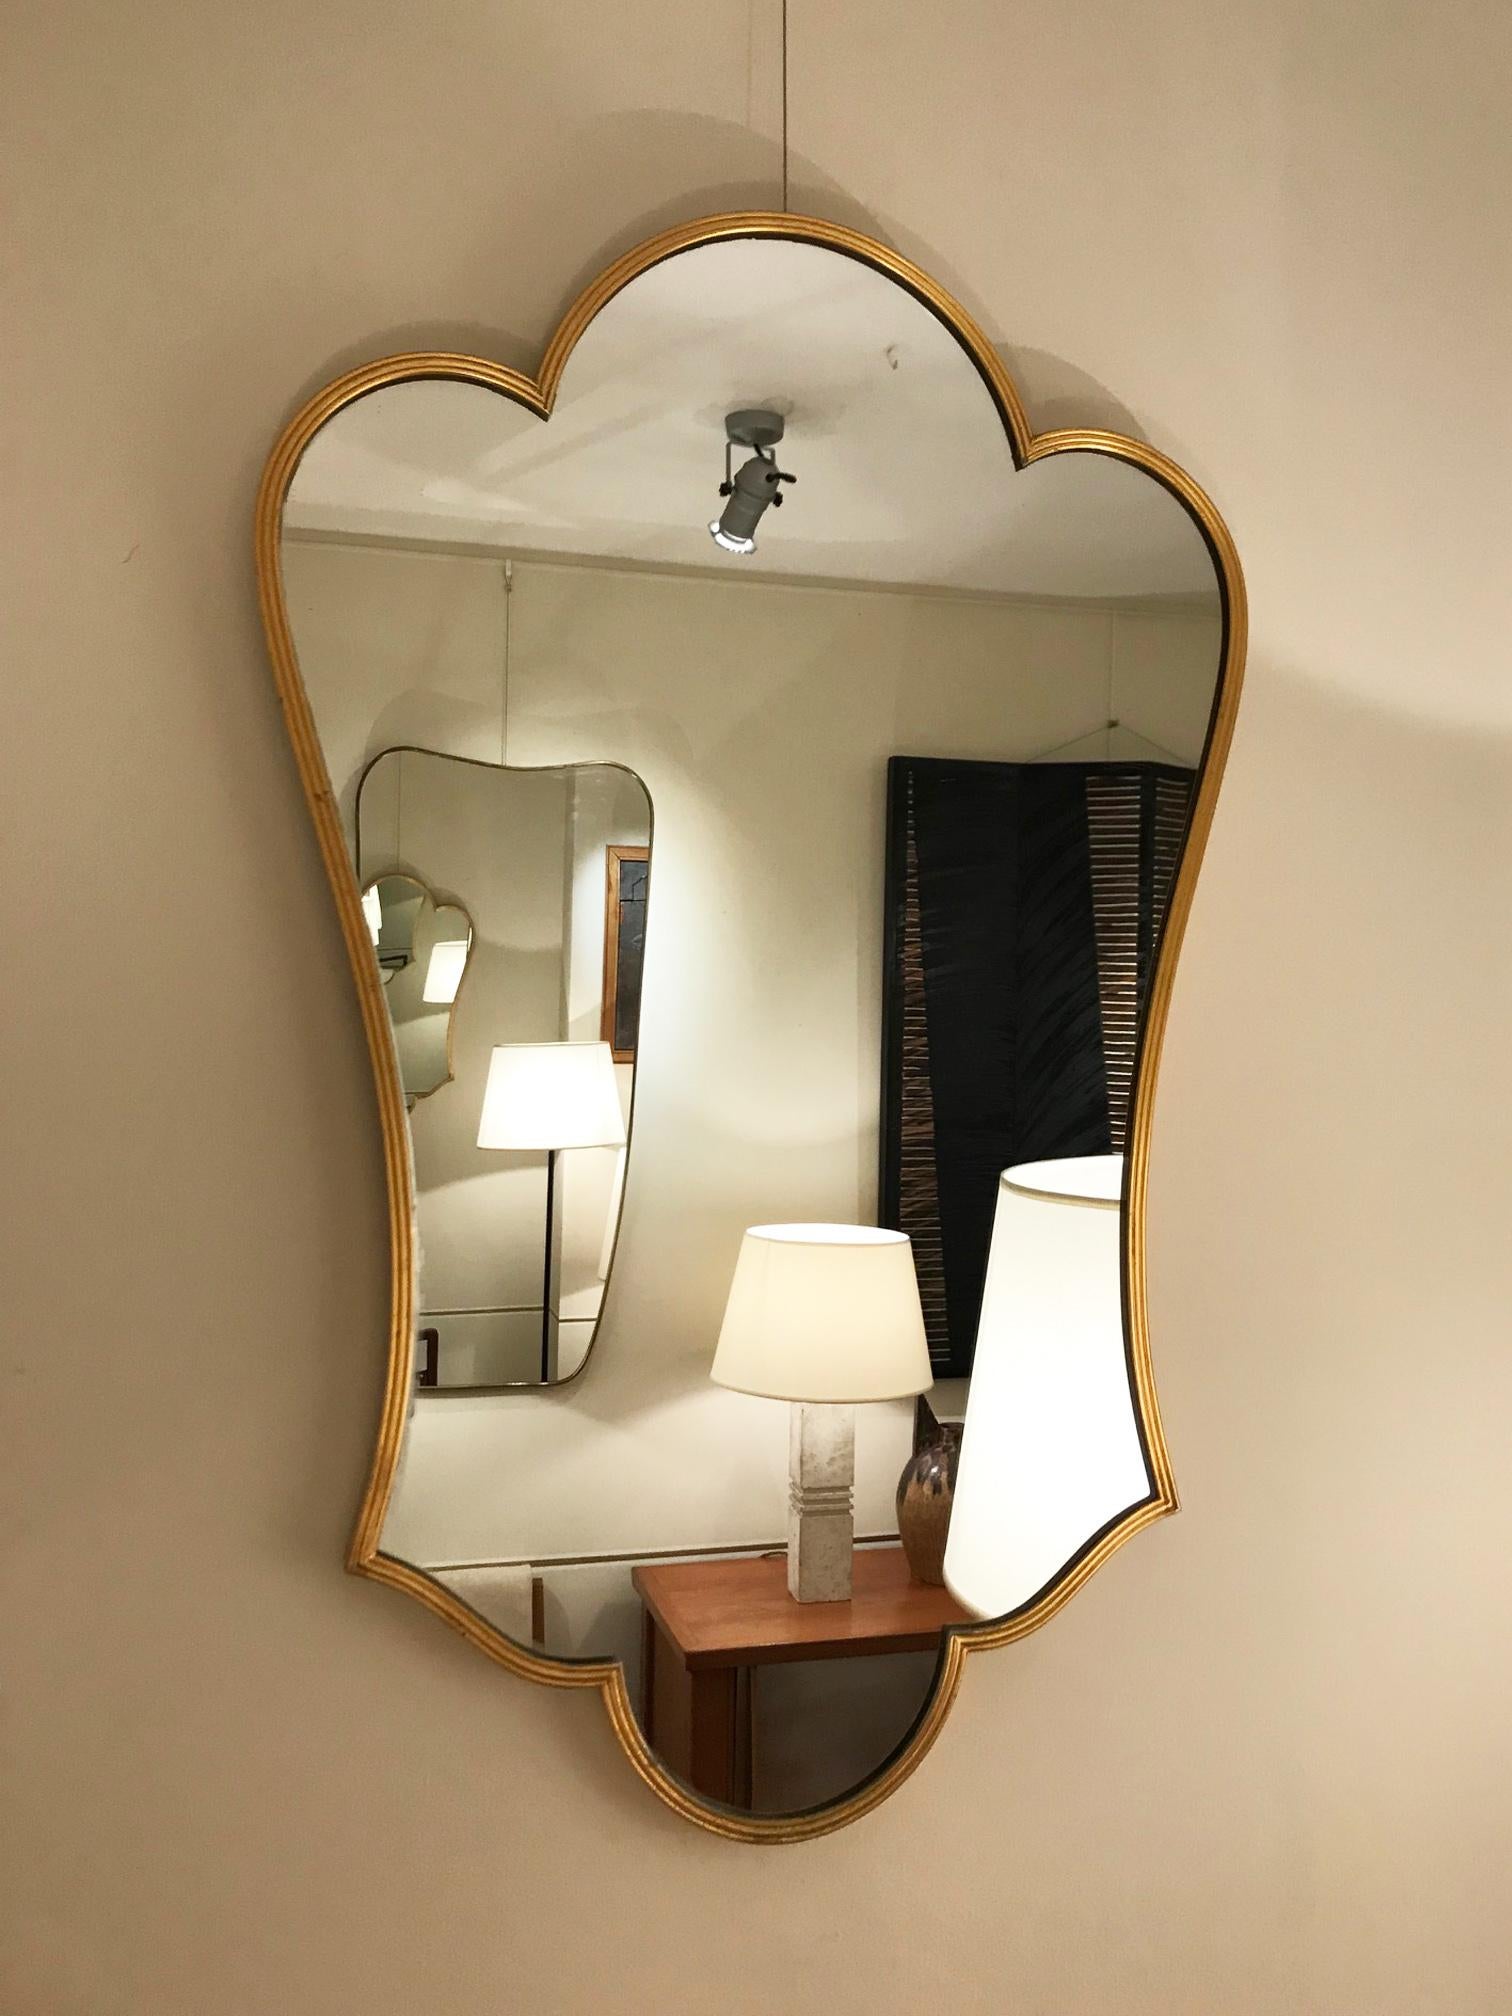 A gold lacquered brass shield shaped mirror
Italy, circa 1955.